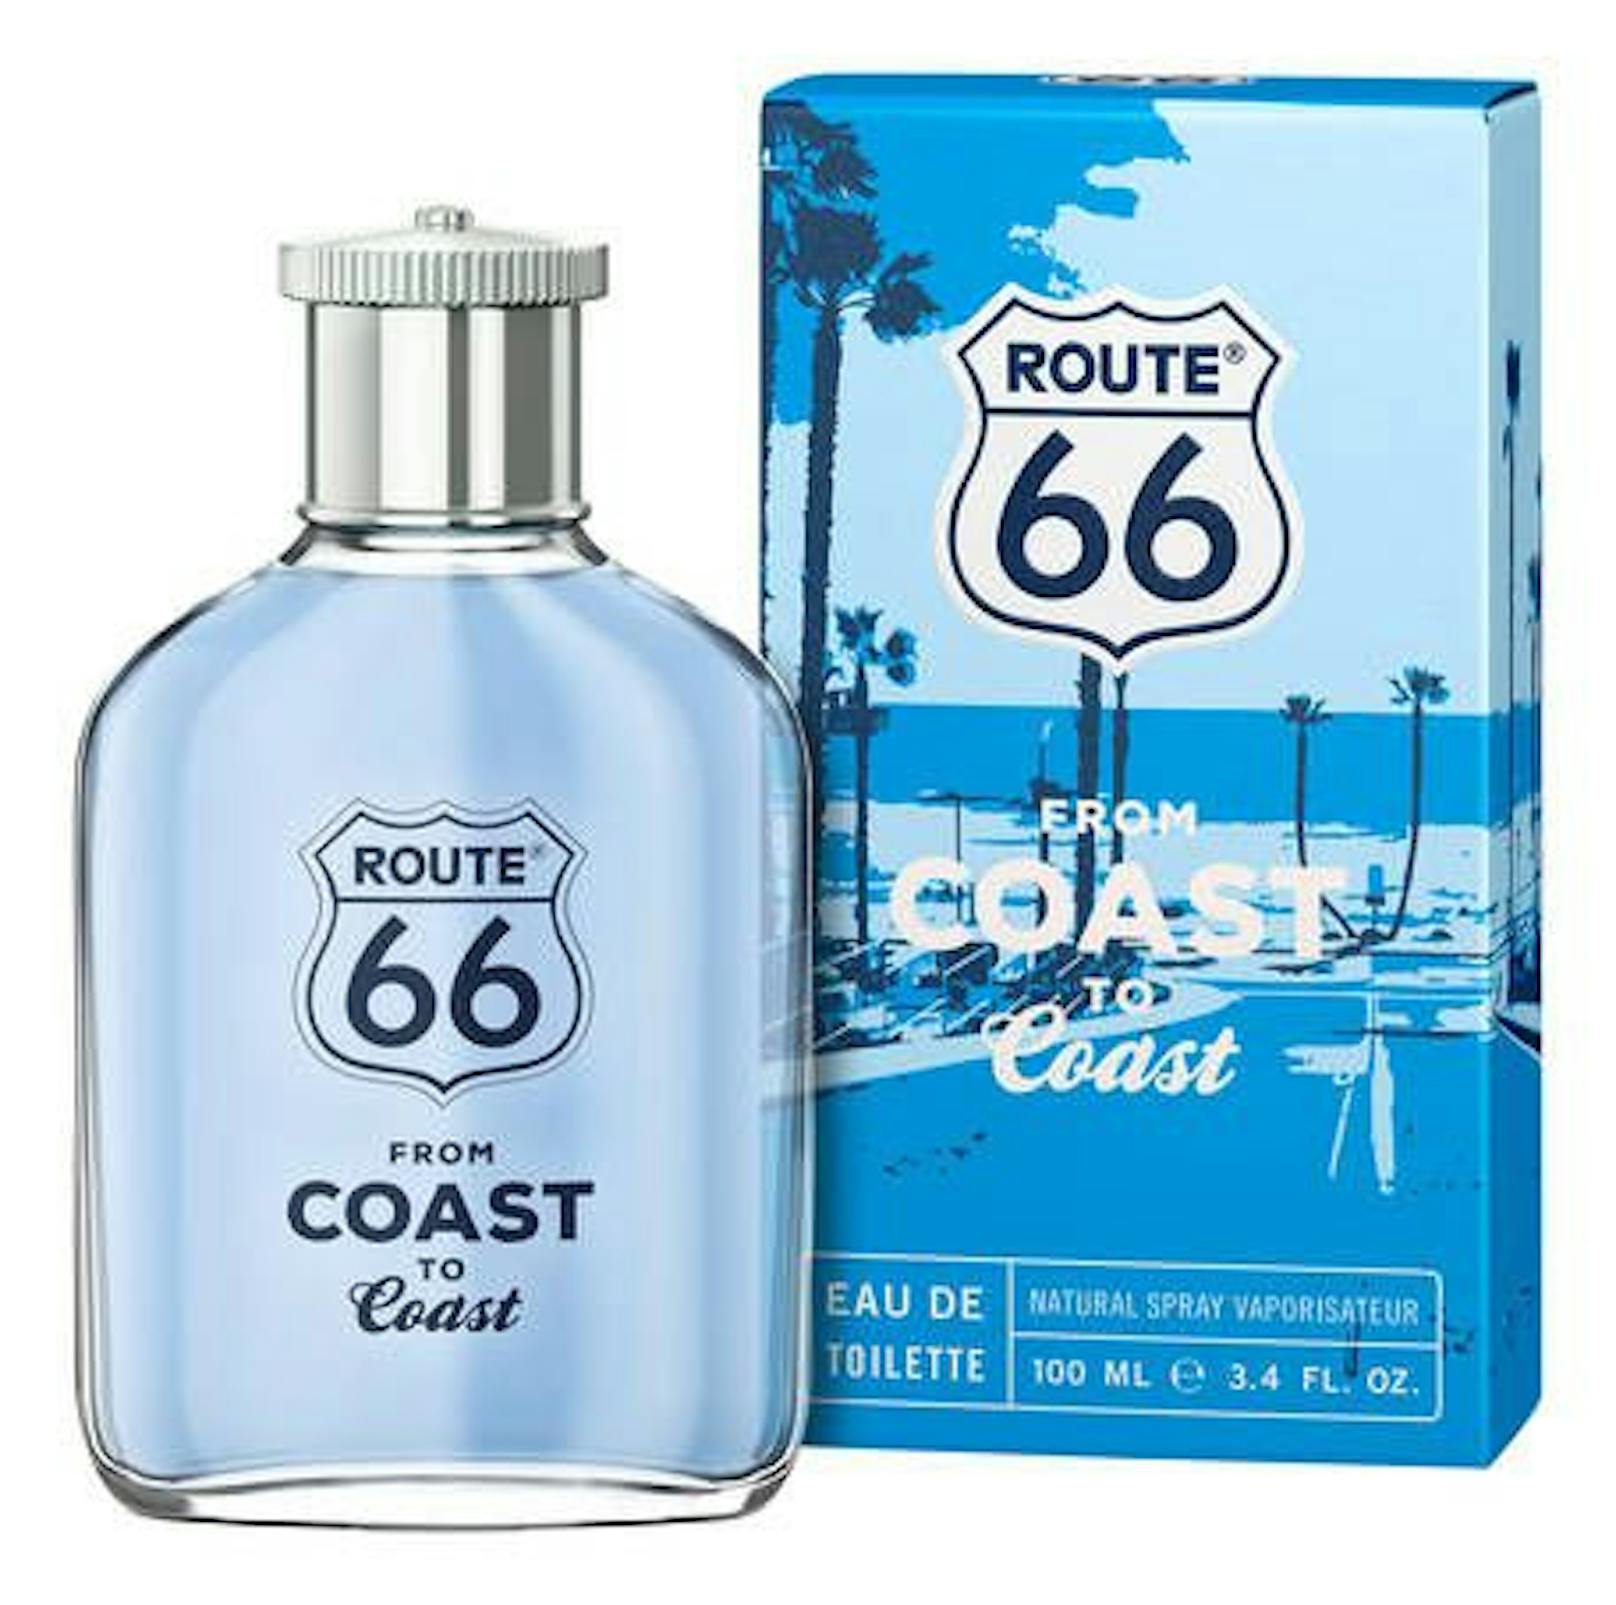 Duft "From Coast To Coast" von Route 66